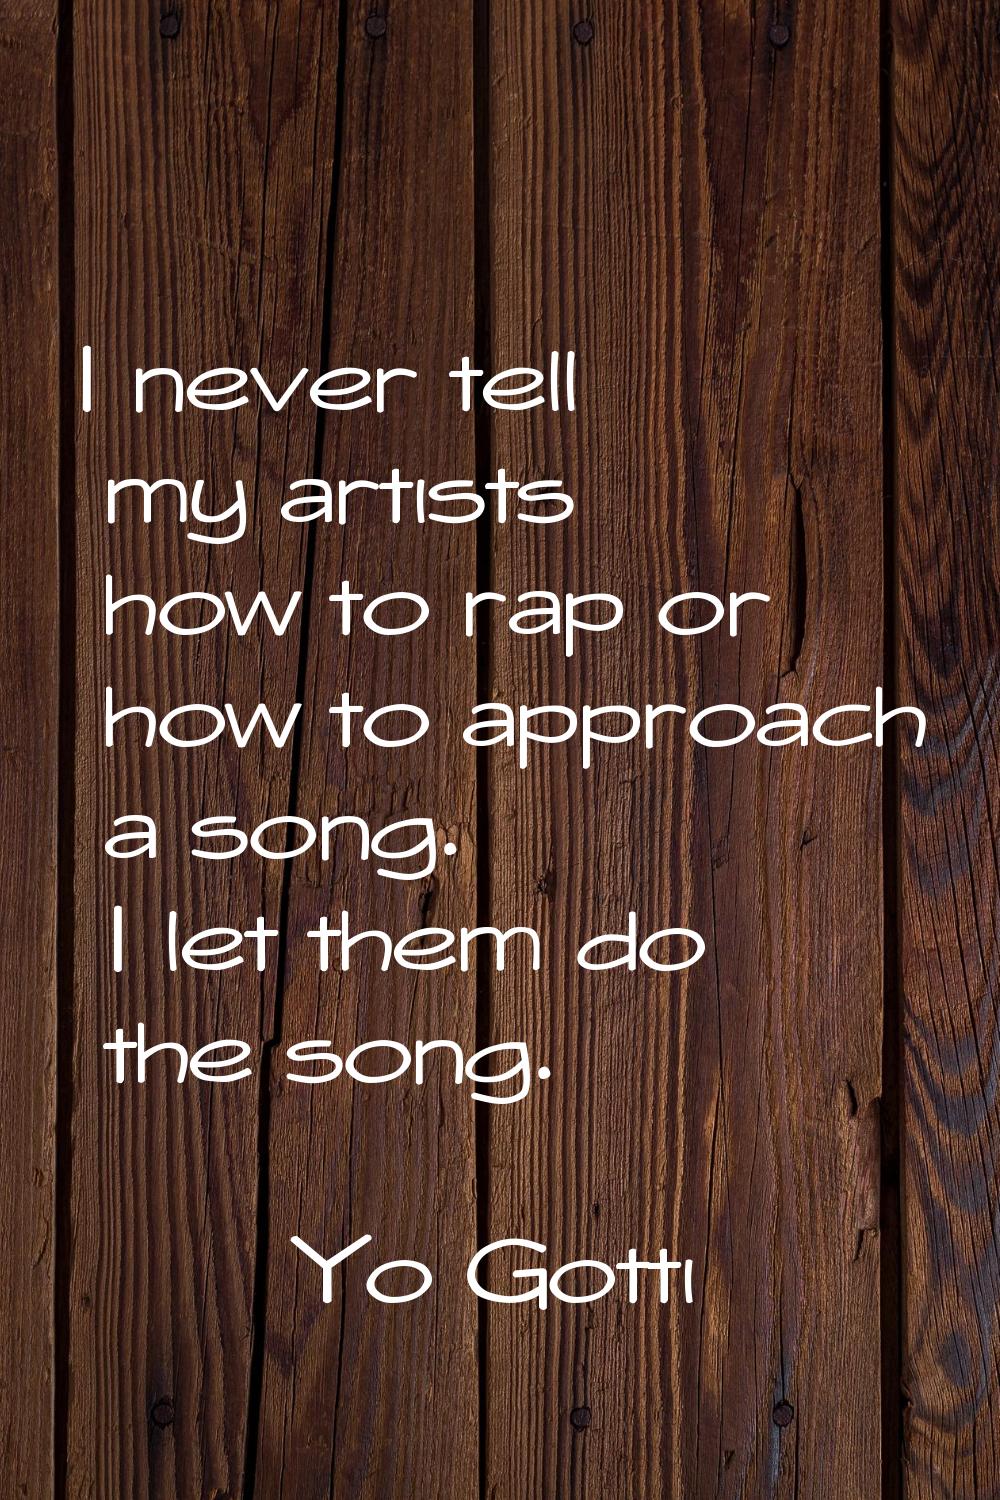 I never tell my artists how to rap or how to approach a song. I let them do the song.